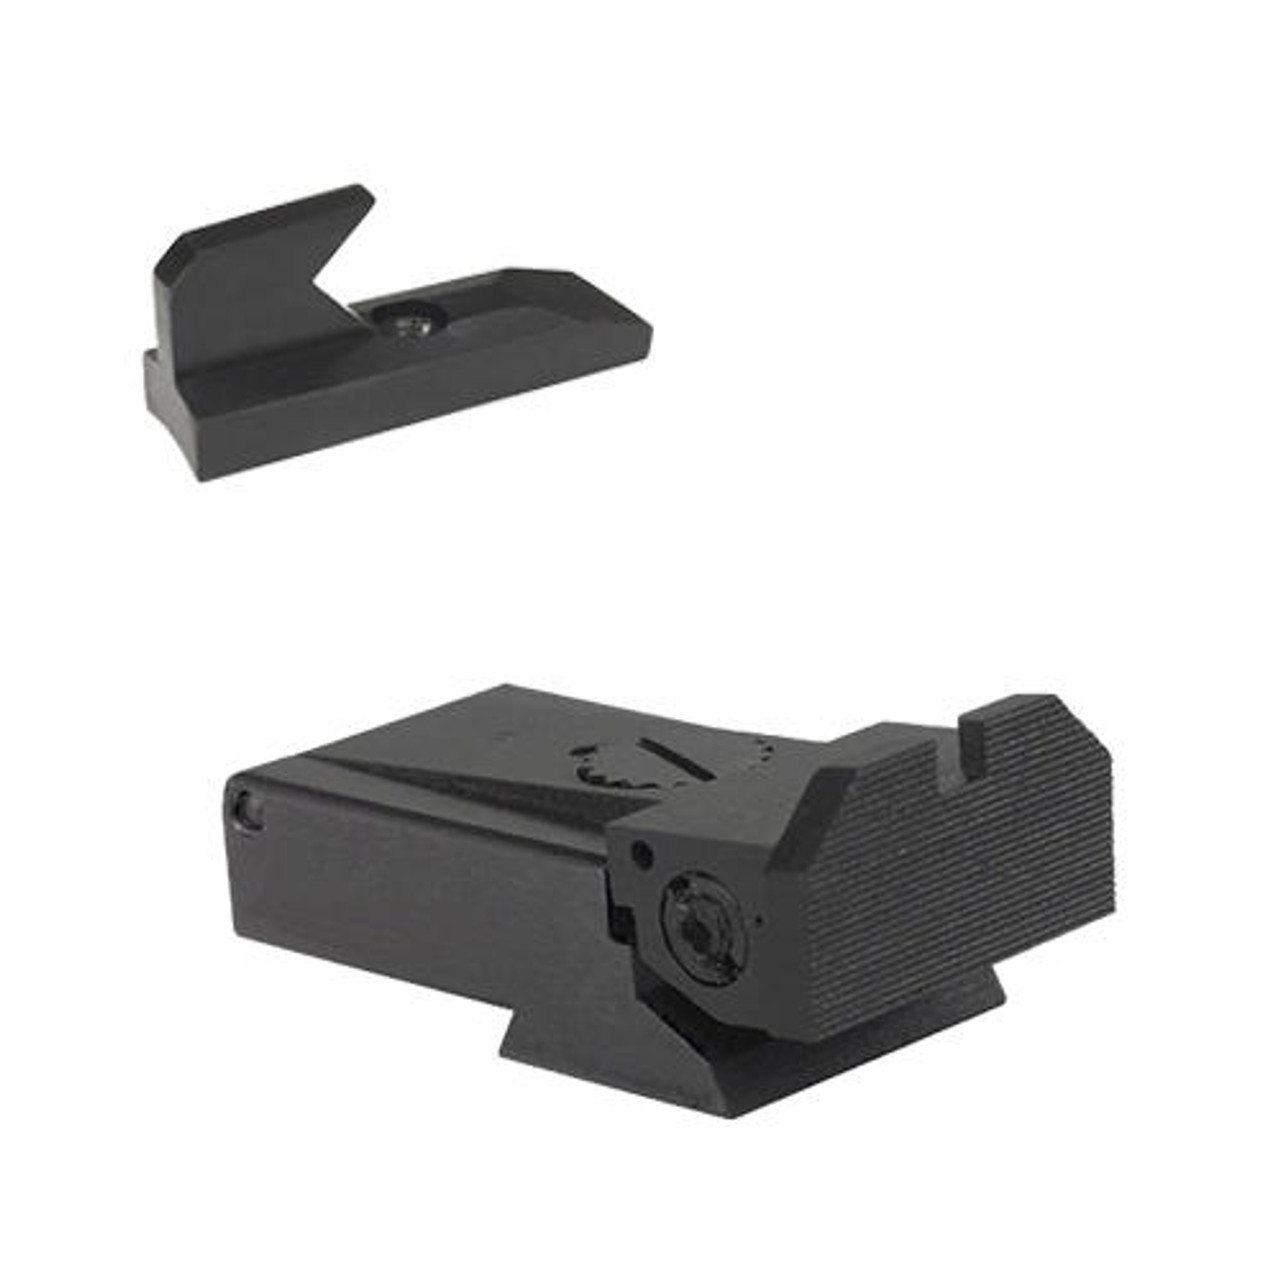 Kensight Kensight Fully adjustable rear sight for Ruger MKII and MKIII, beveled blade w/serrations - Includes Undercut patridge front sight 0.070 higher than factory front, no serrations